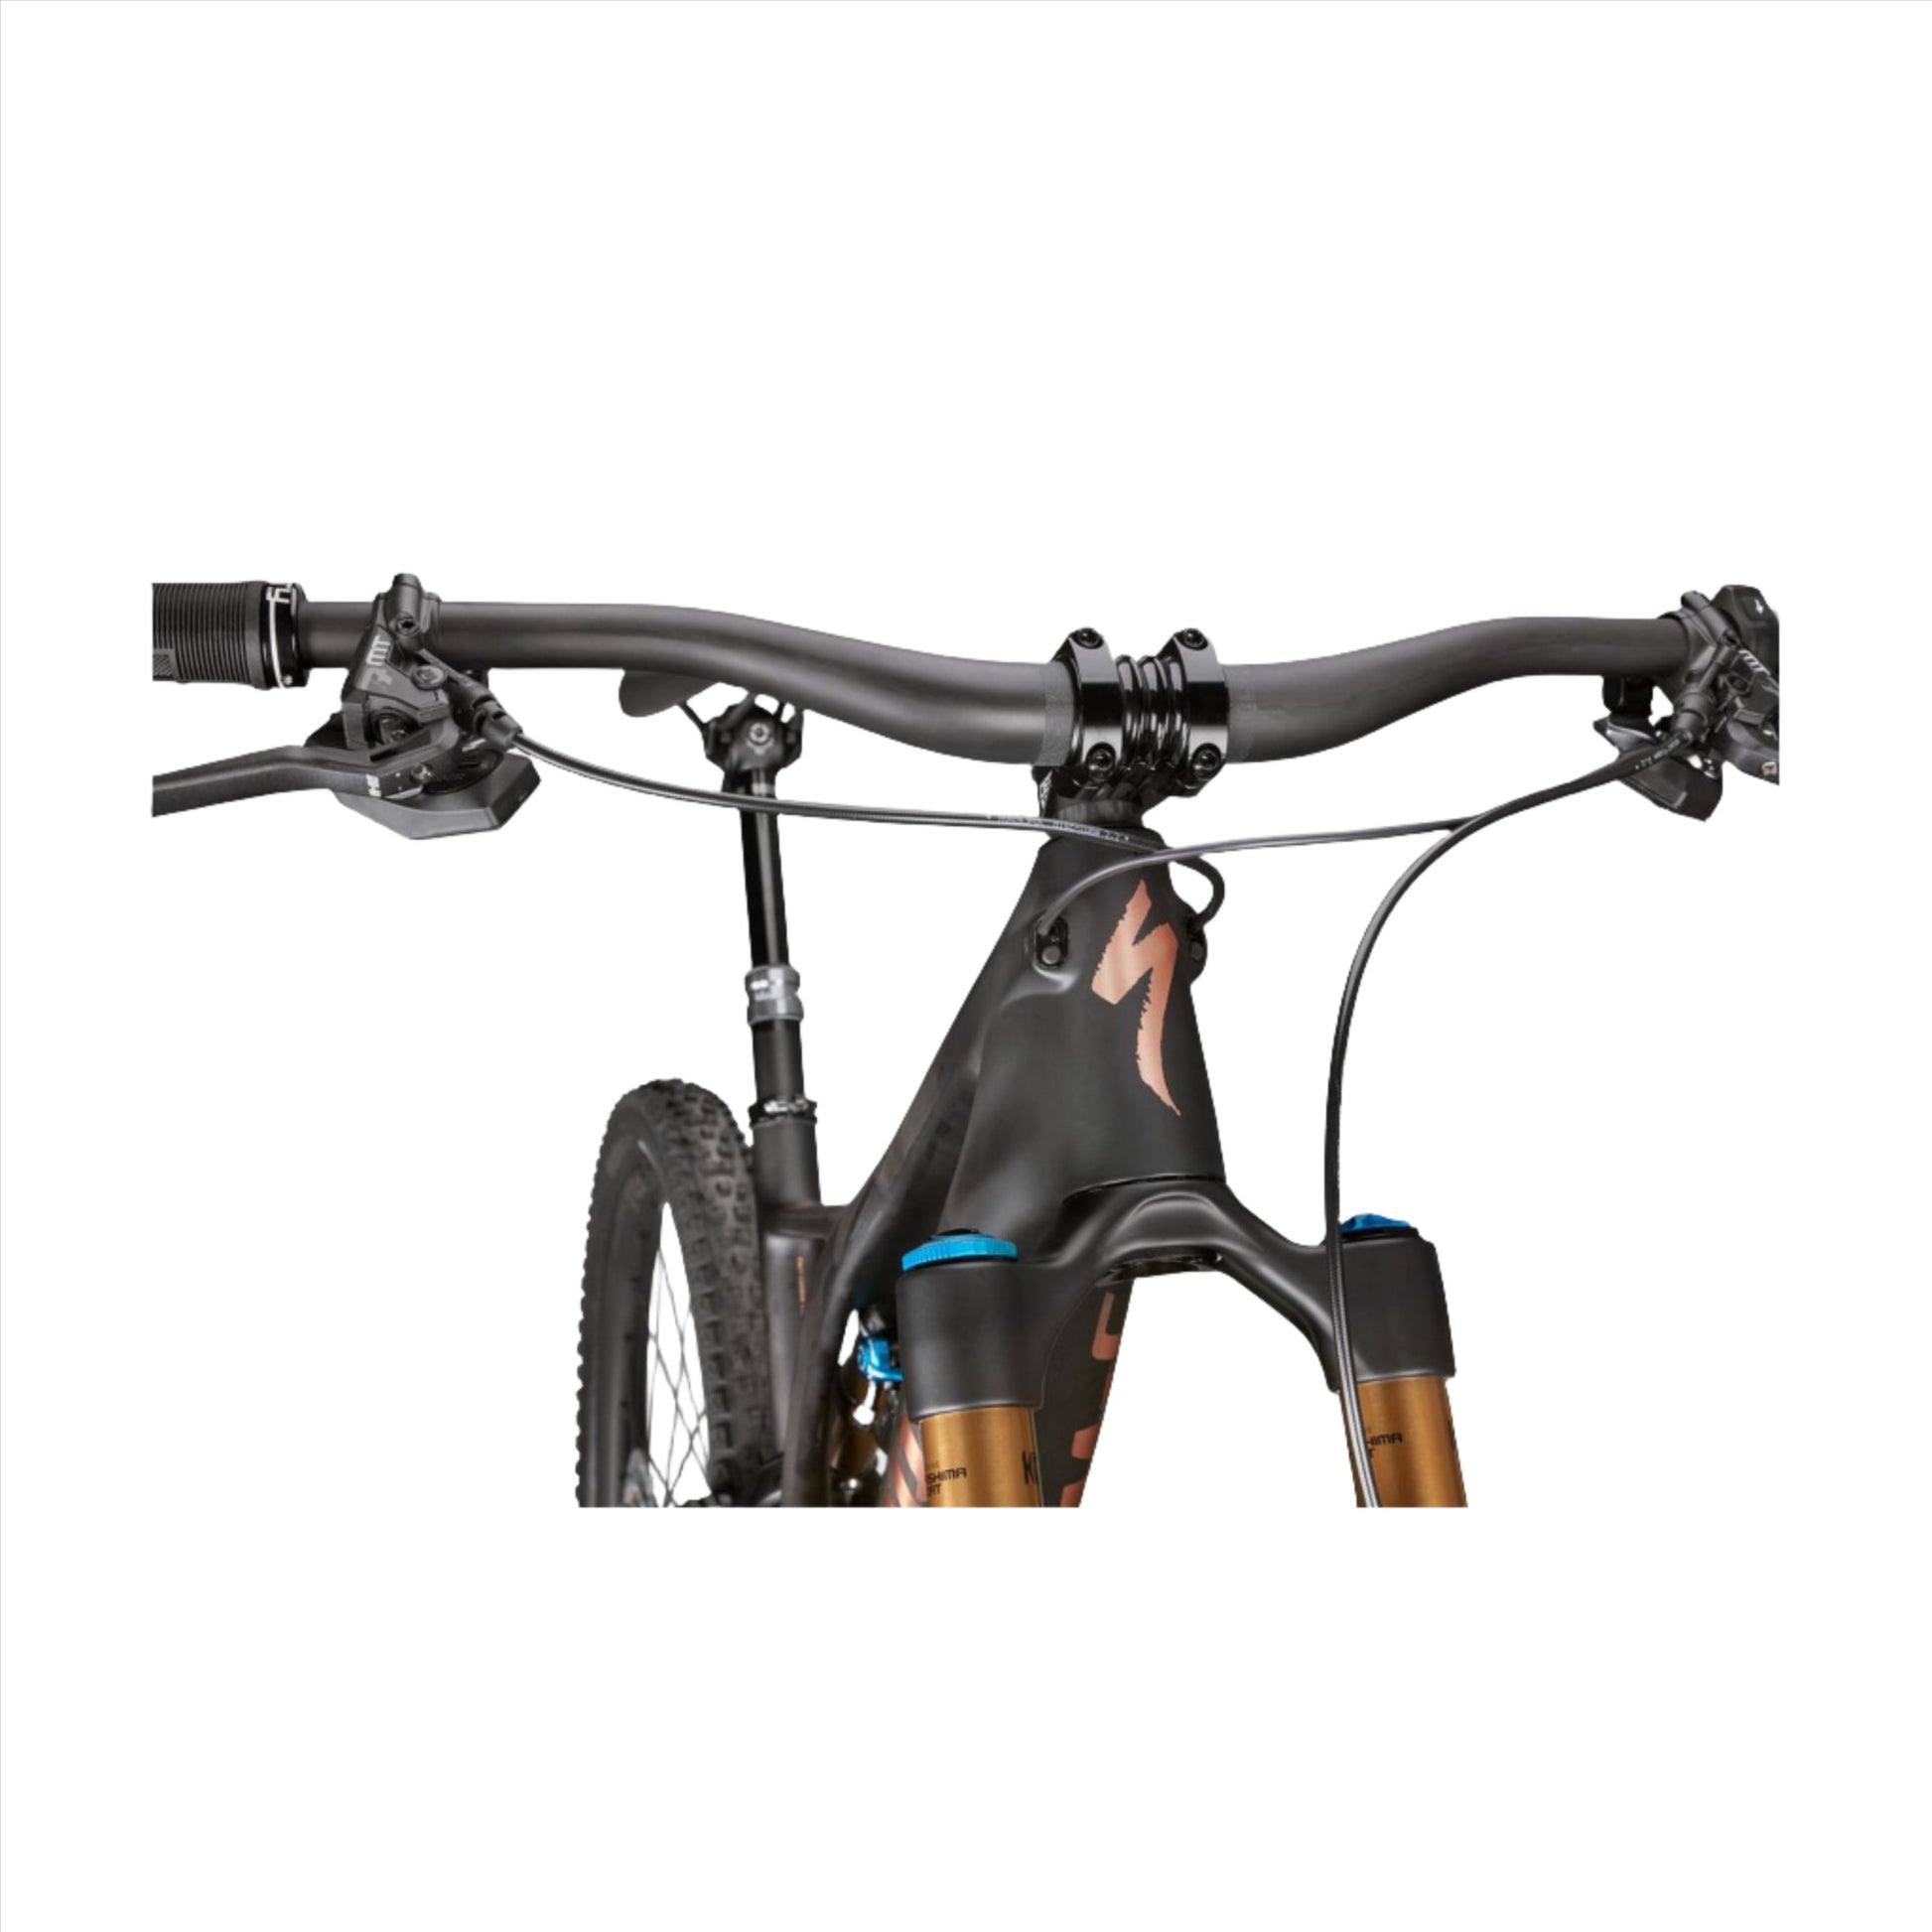 S-Works Turbo Levo SL | Complete Cyclist - Turbo Levo SL is a new, lightweight breed of eMTB that harnesses the quick and lively ride of our Stumpjumper...and adds just enough power to introduce a whole